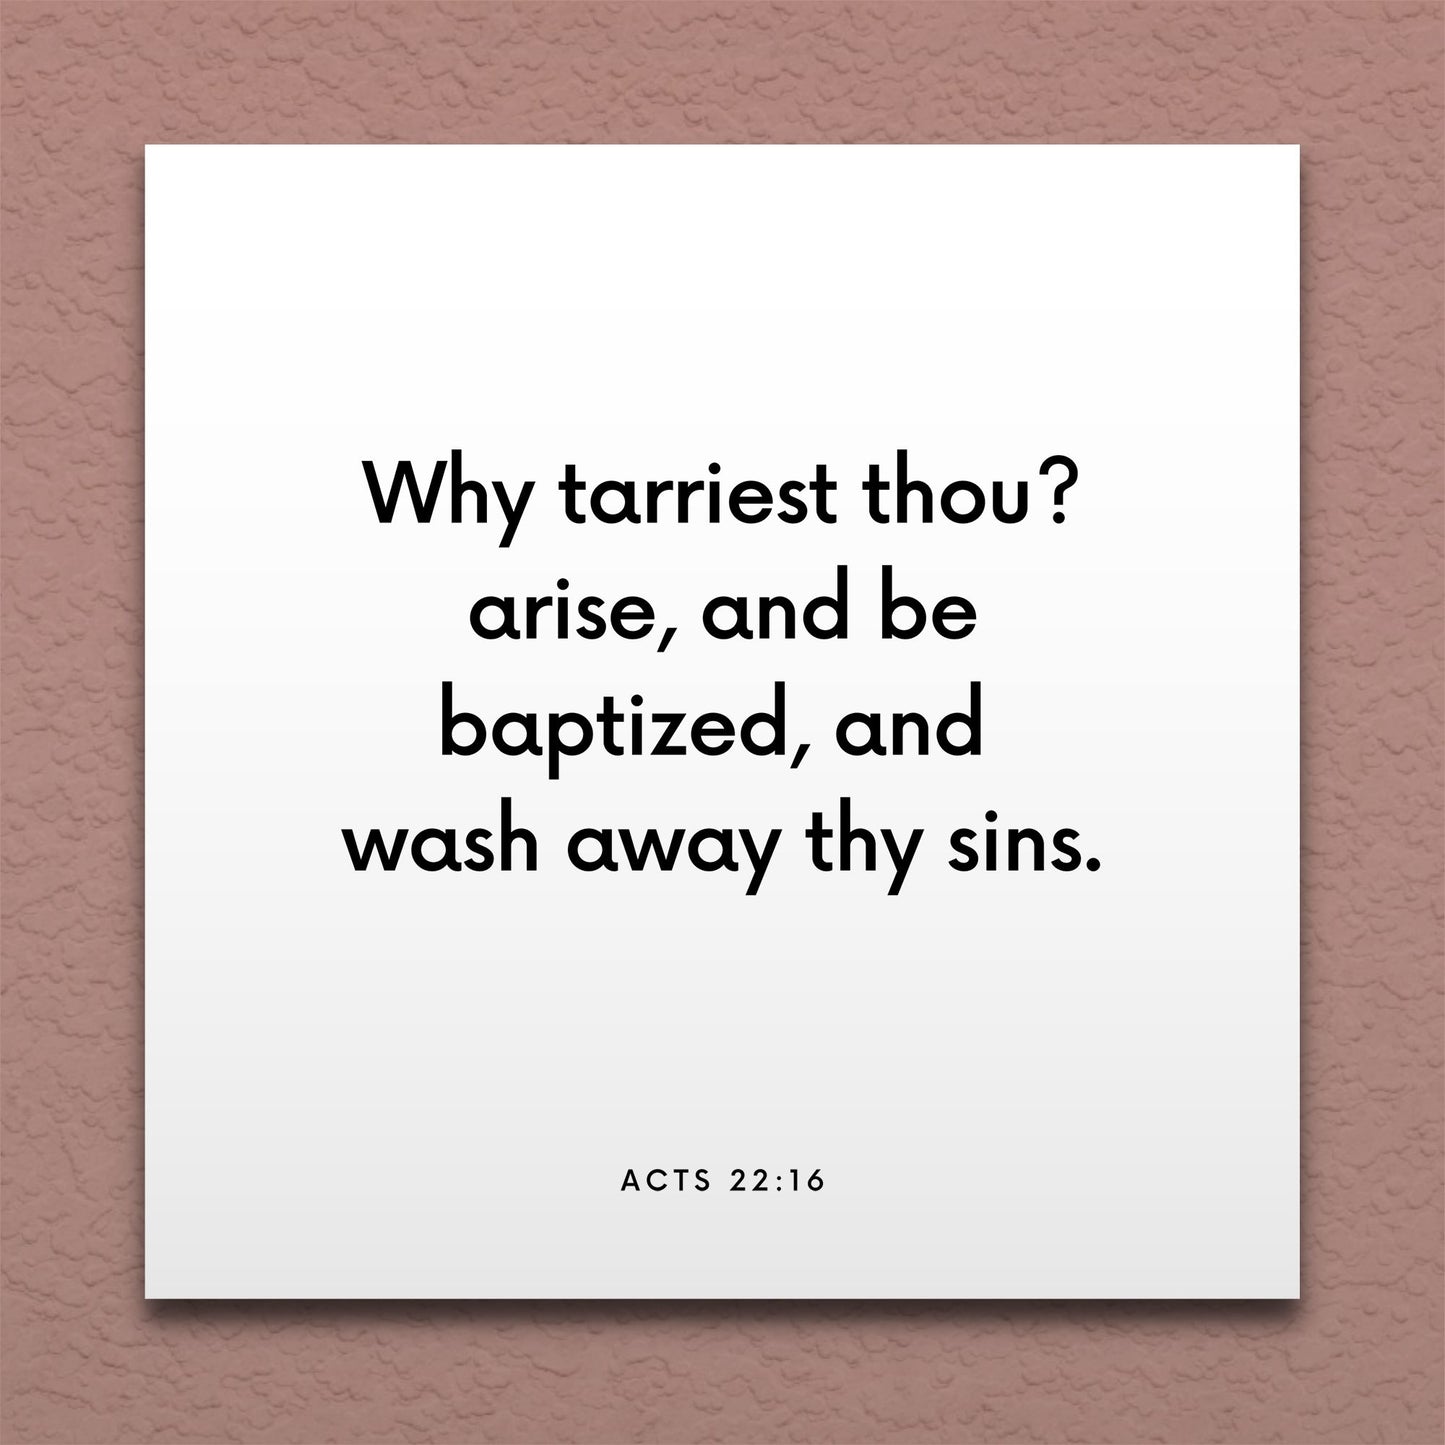 Wall-mounted scripture tile for Acts 22:16 - "Why tarriest thou? arise, and be baptized"